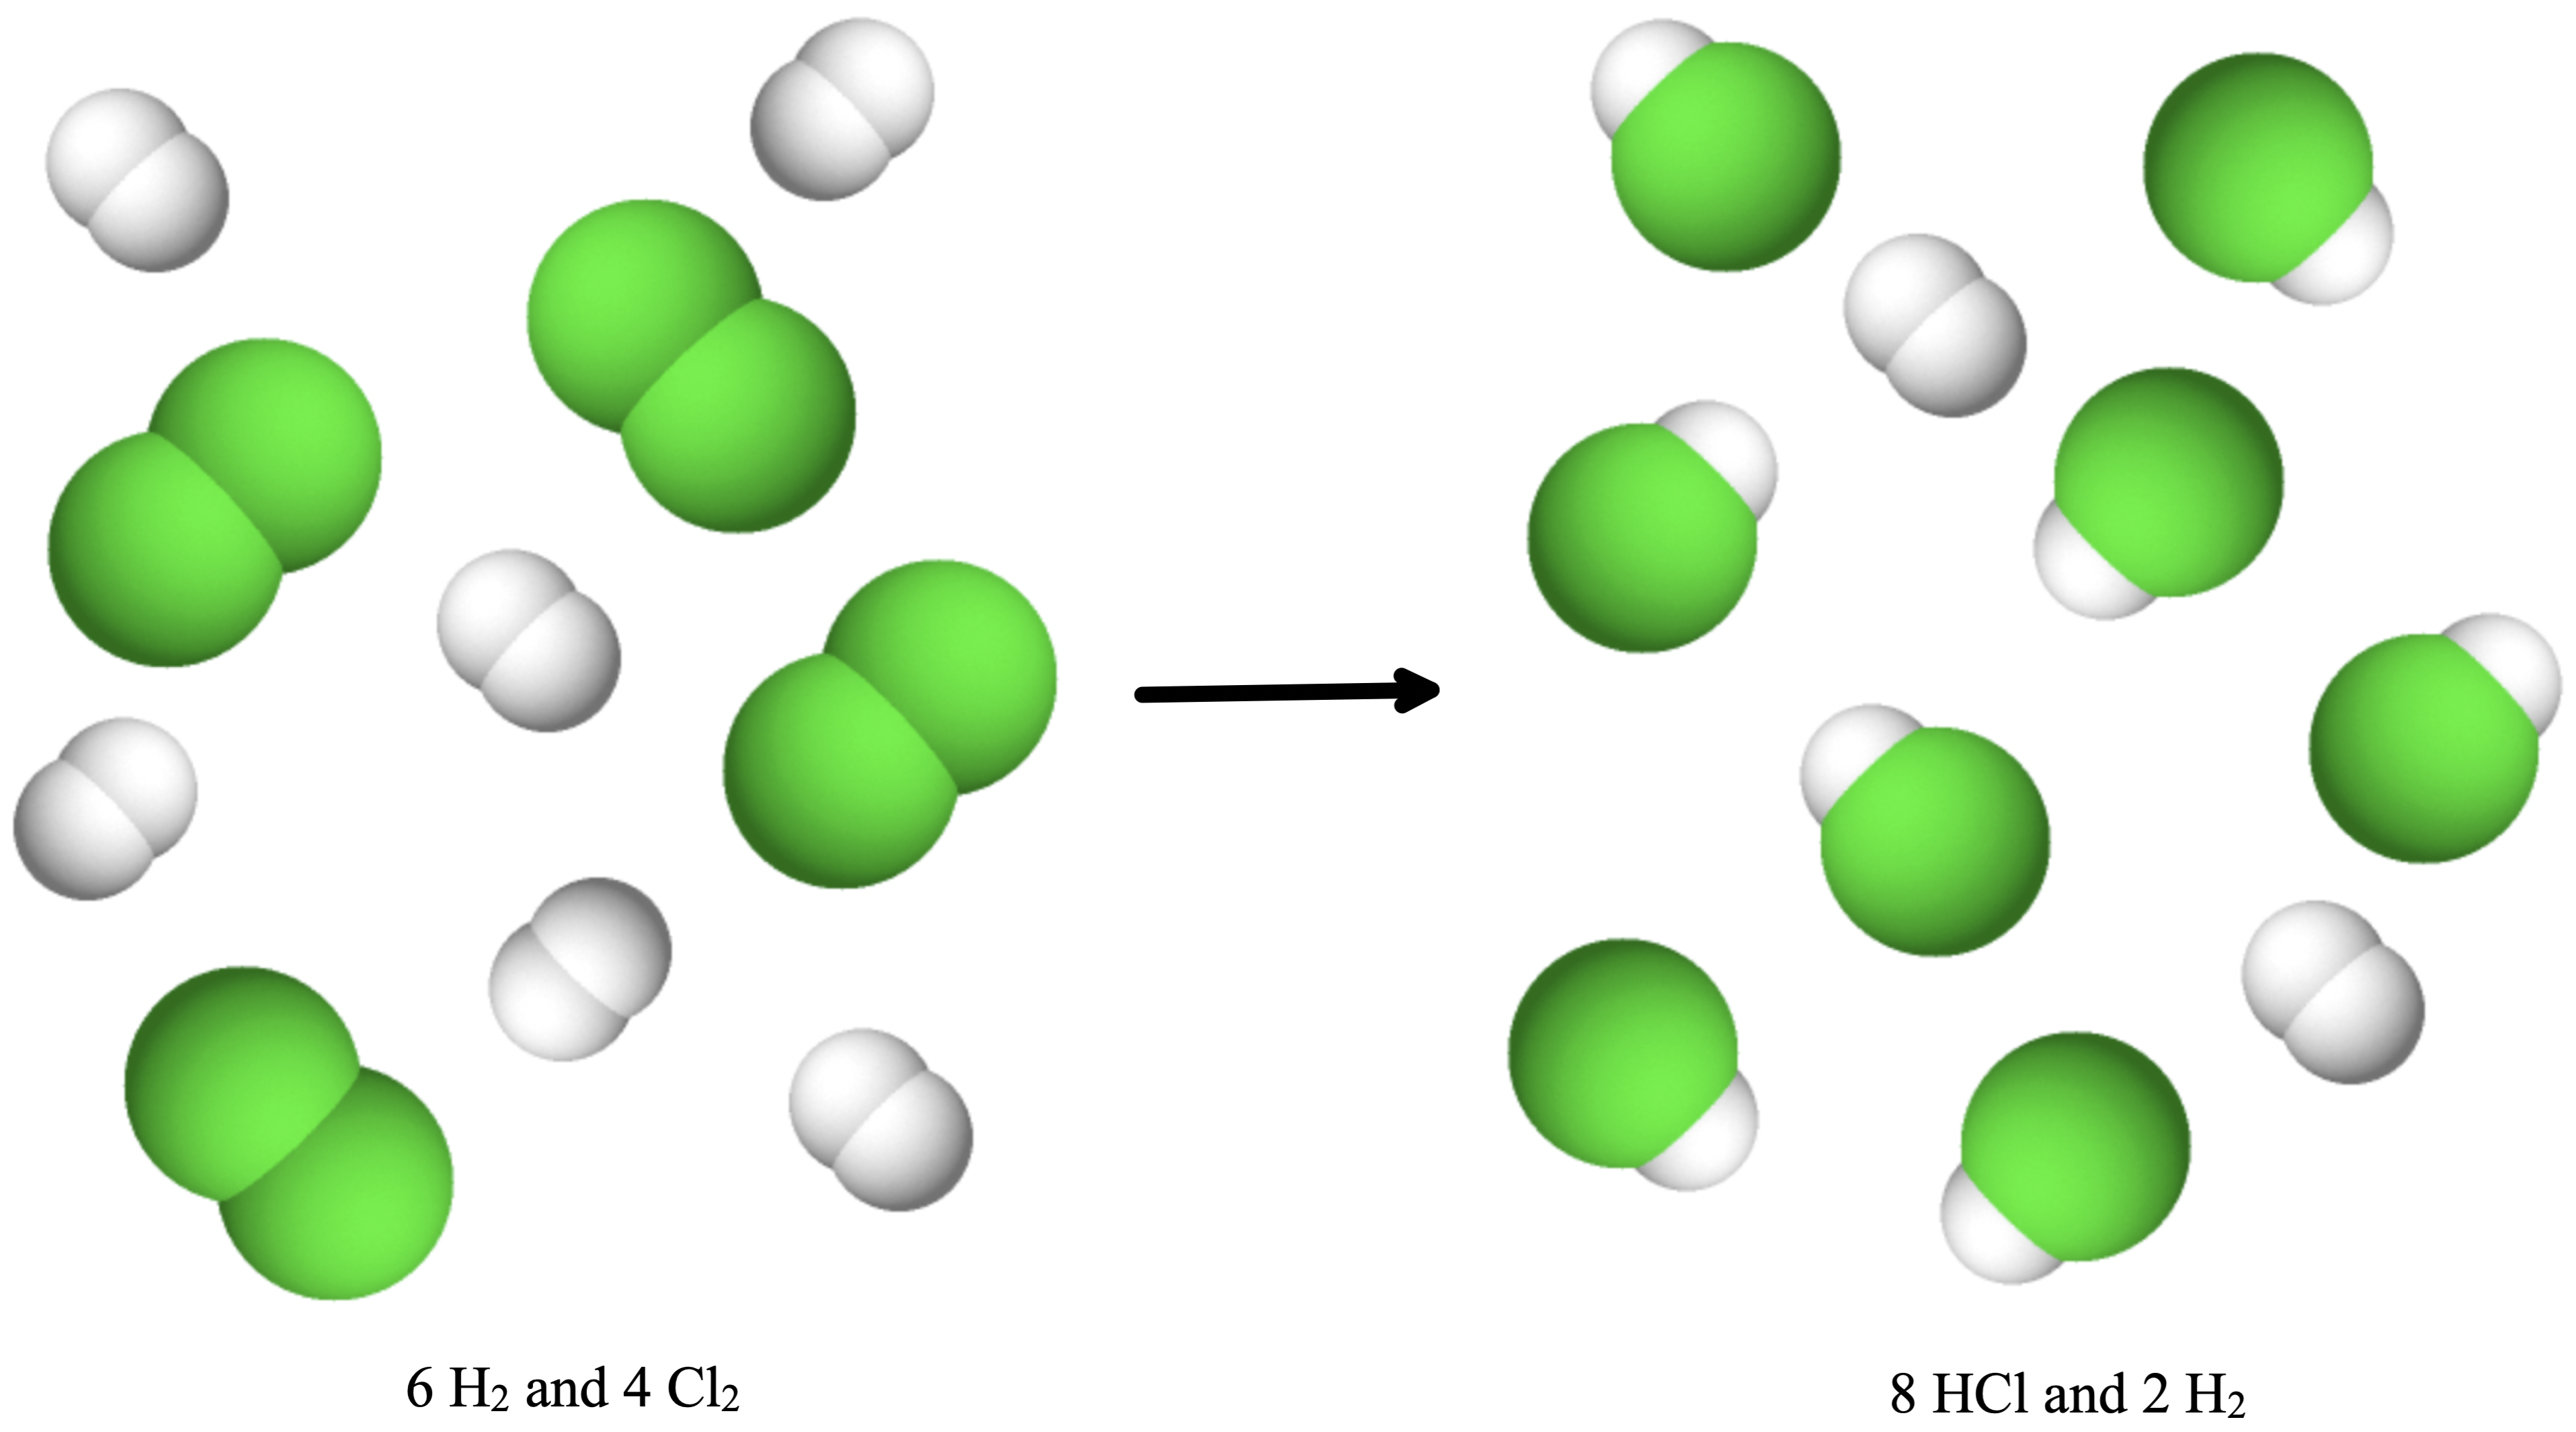 The figure shows a space-filling molecular models reacting. There is a reaction arrow pointing to the right in the middle. To the left of the reaction arrow there are three molecules each consisting of two green spheres bonded together. There are also five molecules each consisting of two smaller, white spheres bonded together. Above these molecules is the label, “Before reaction,” and below these molecules is the label, “6 H subscript 2 and 4 C l subscript 2.” To the right of the reaction arrow, there are eight molecules each consisting of one green sphere bonded to a smaller white sphere. There are also two molecules each consisting of two white spheres bonded together. Above these molecules is the label, “After reaction,” and below these molecules is the label, “8 H C l and 2 H subscript 2.”